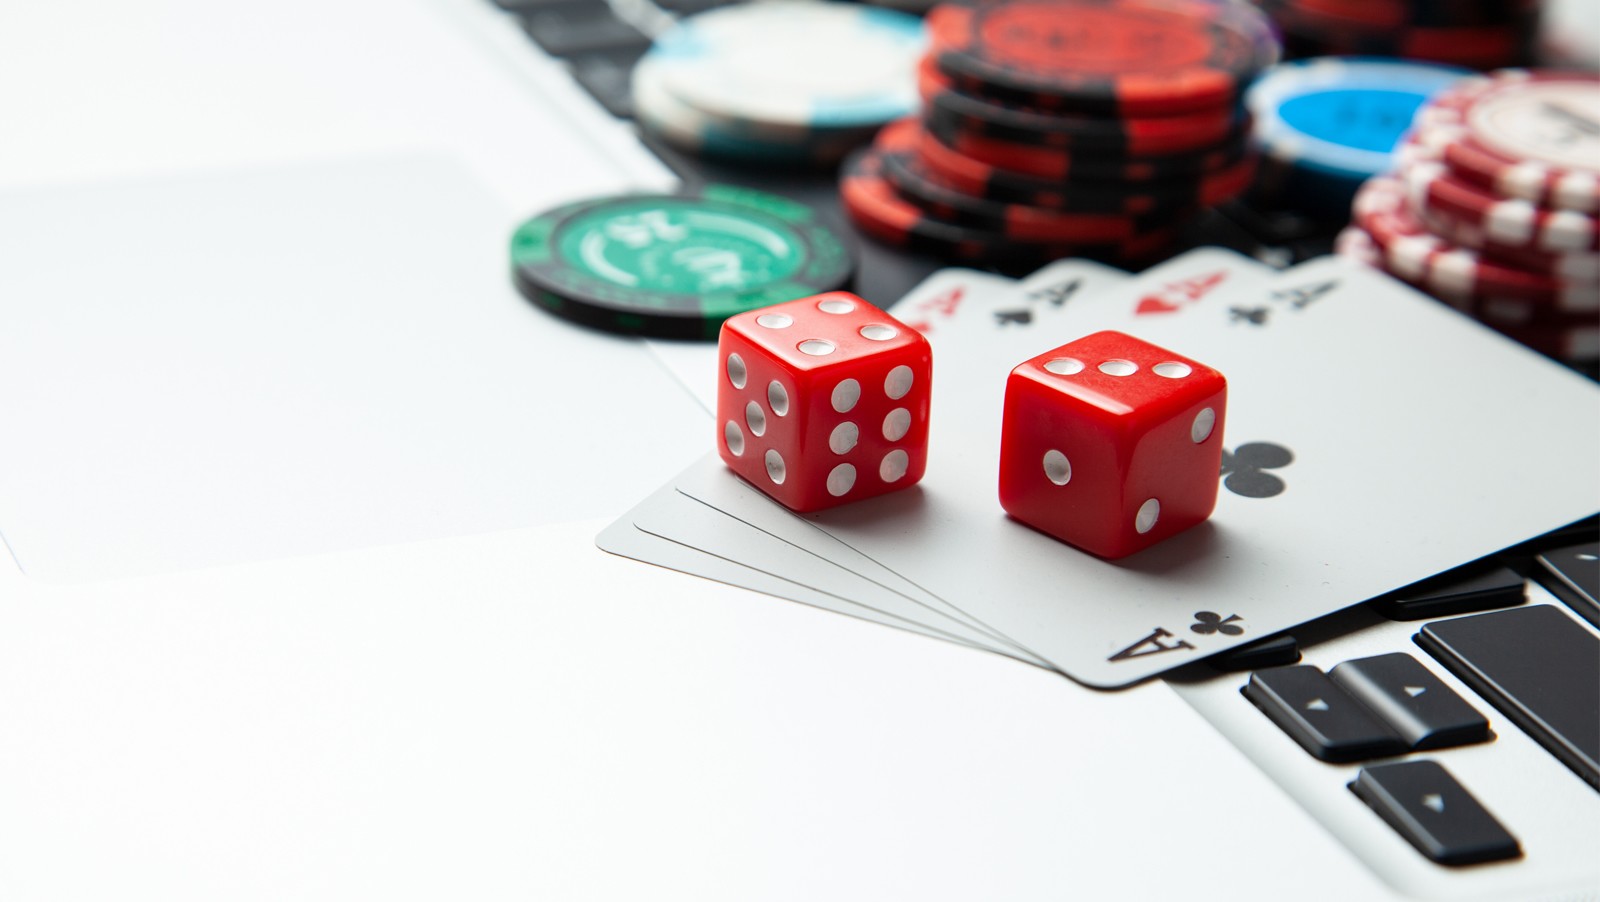 The ‘party’ is far from over for online gambling